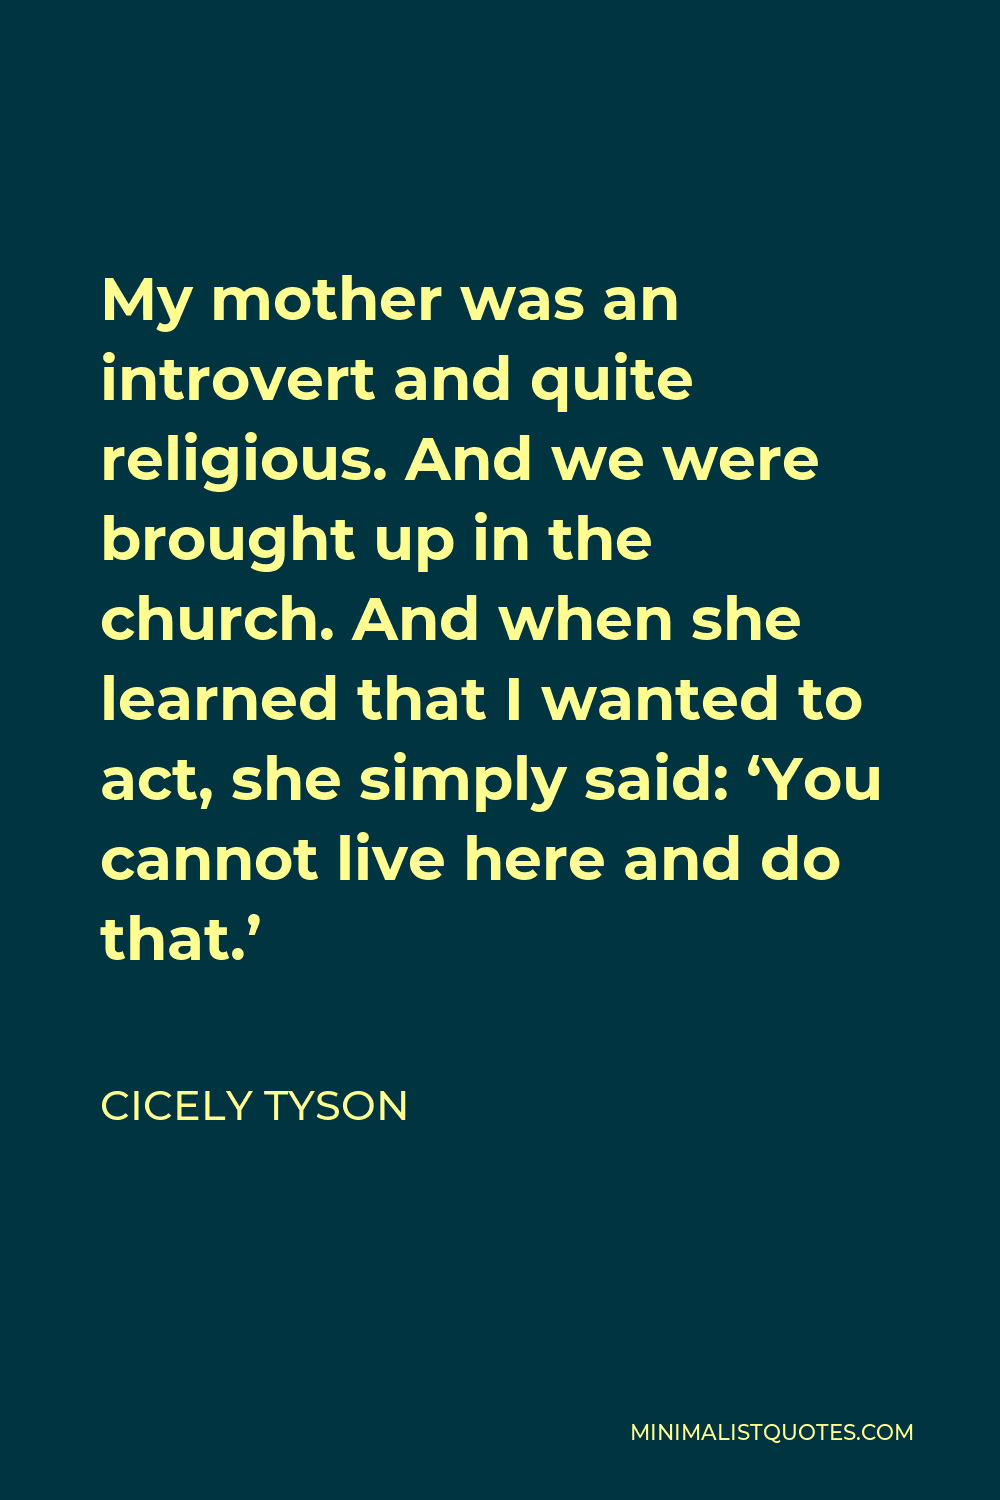 Cicely Tyson Quote - My mother was an introvert and quite religious. And we were brought up in the church. And when she learned that I wanted to act, she simply said: ‘You cannot live here and do that.’